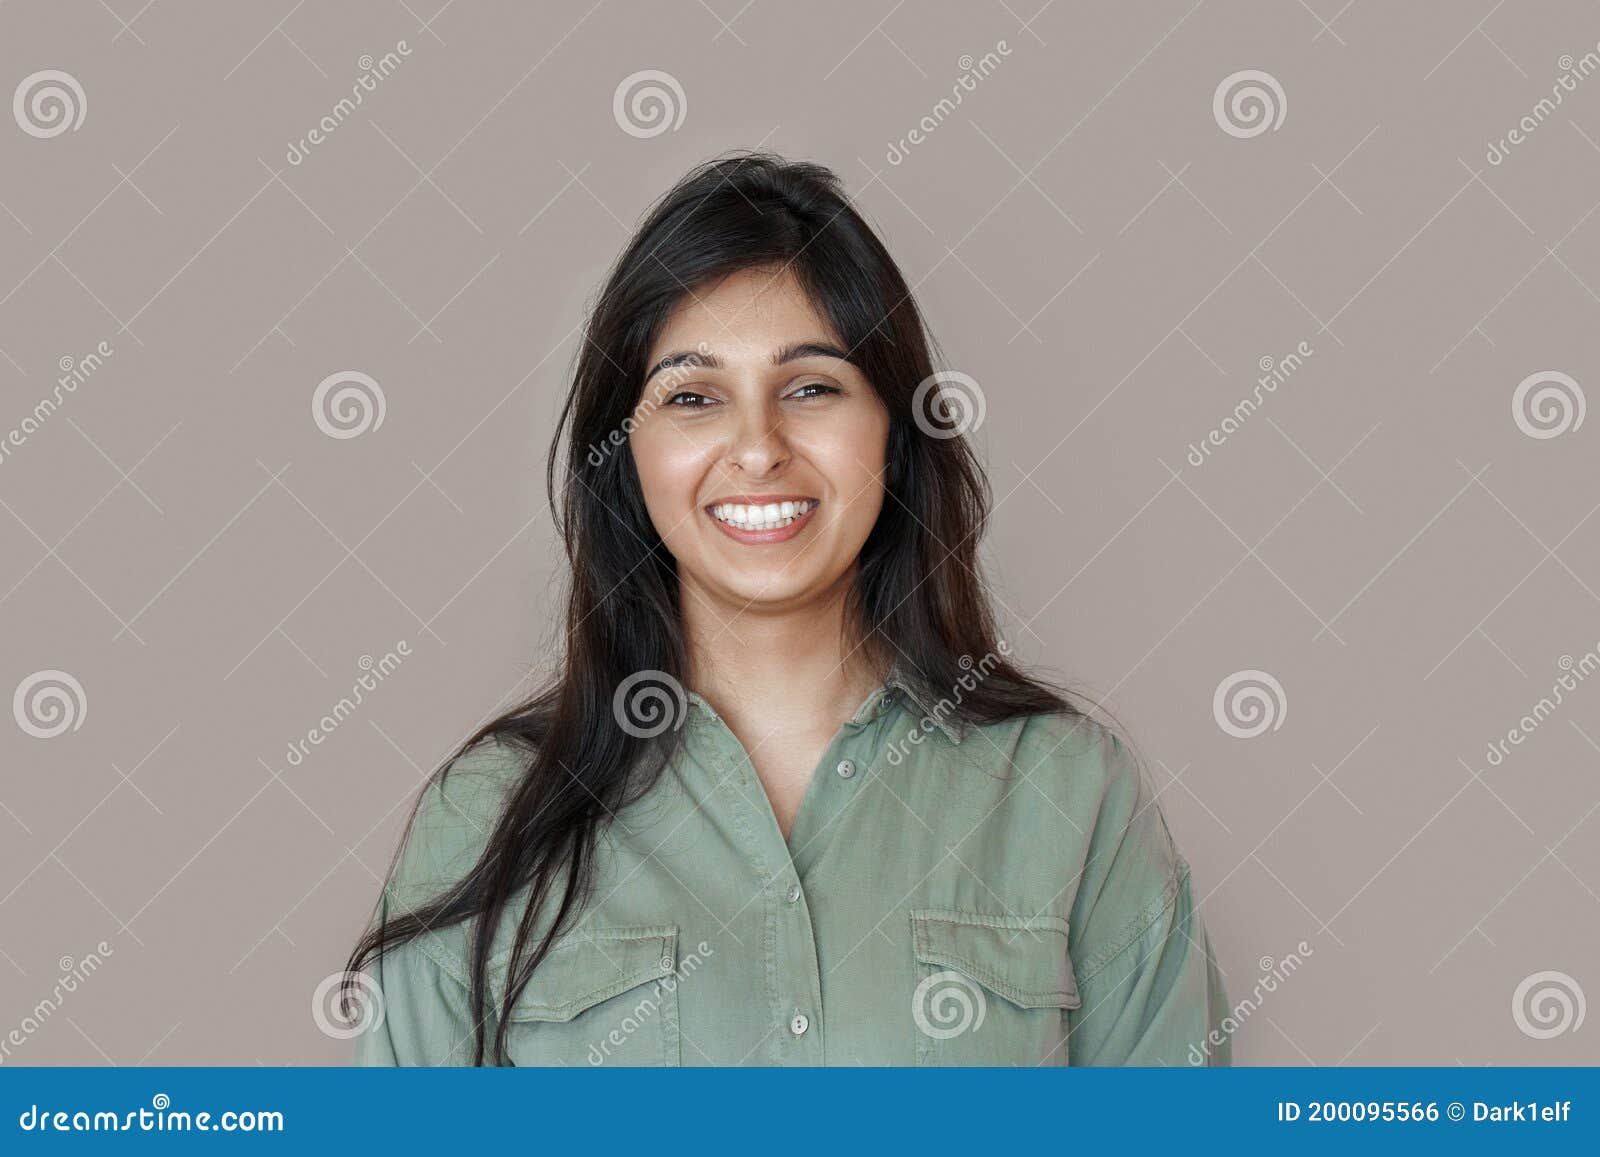 Smiling Cheerful Young Indian Woman Laughing Isolated on Brown Background.  Stock Photo - Image of background, dental: 200095566